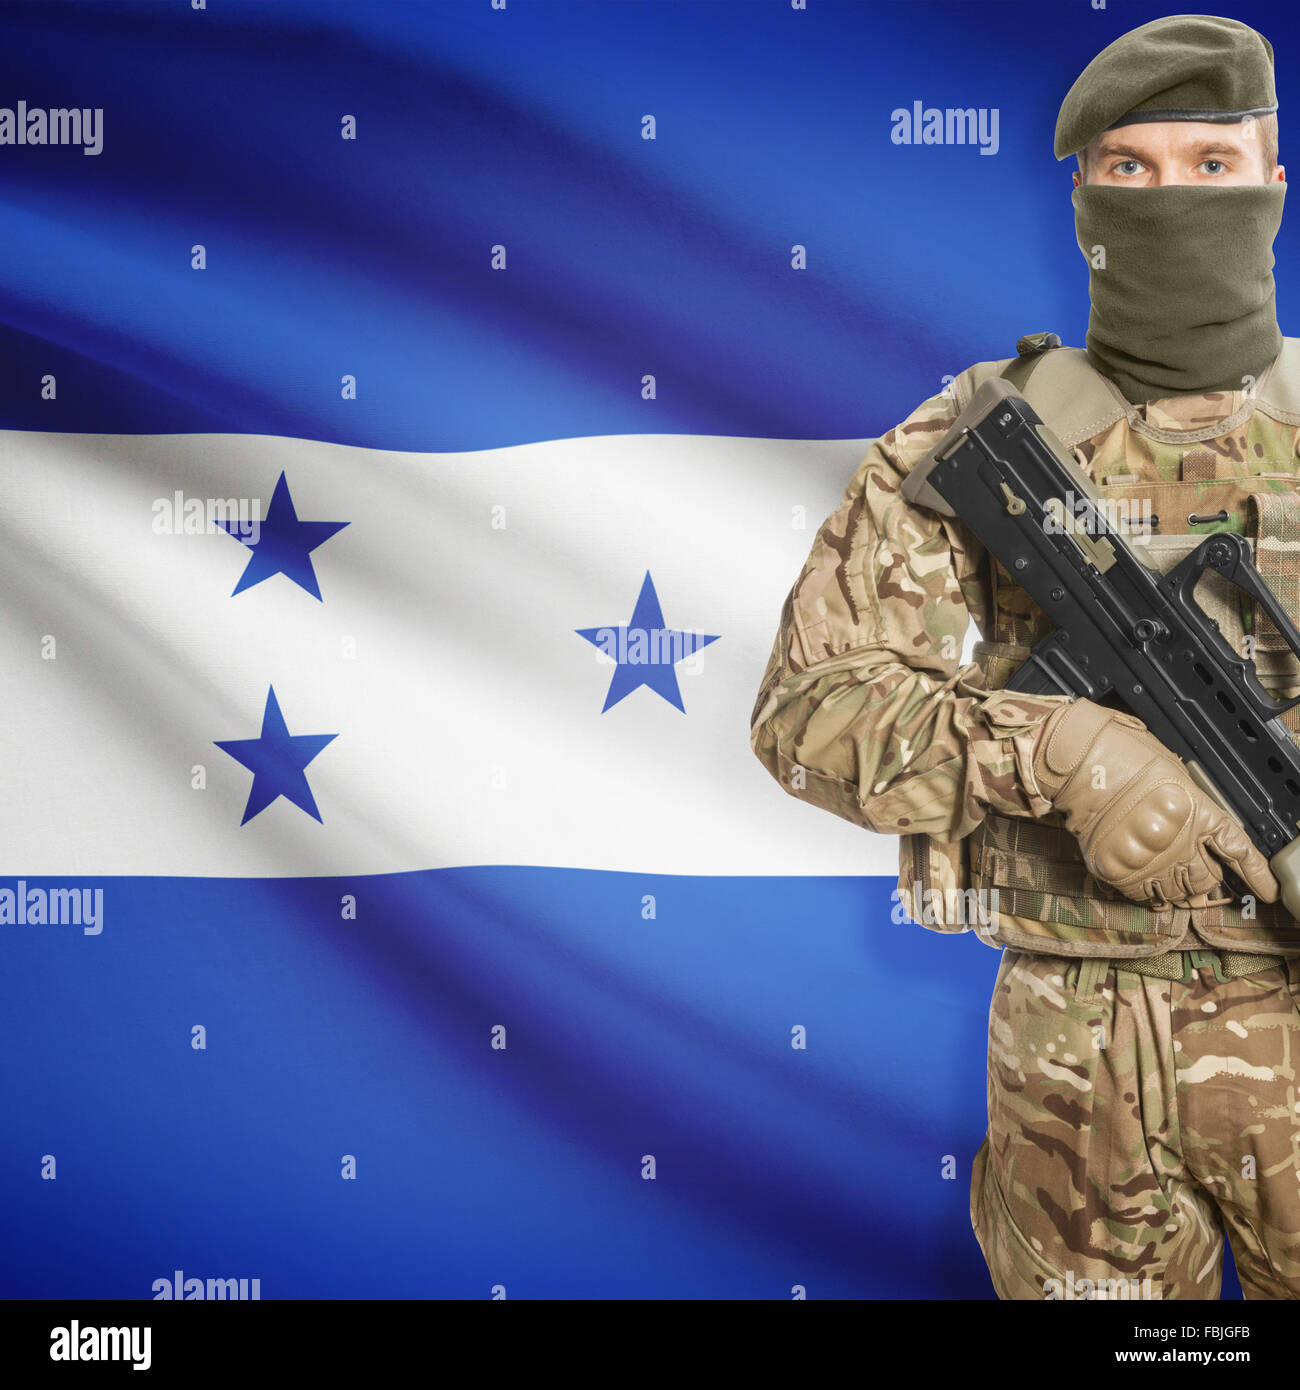 Soldier with machine gun and national flag on background series - Honduras Stock Photo